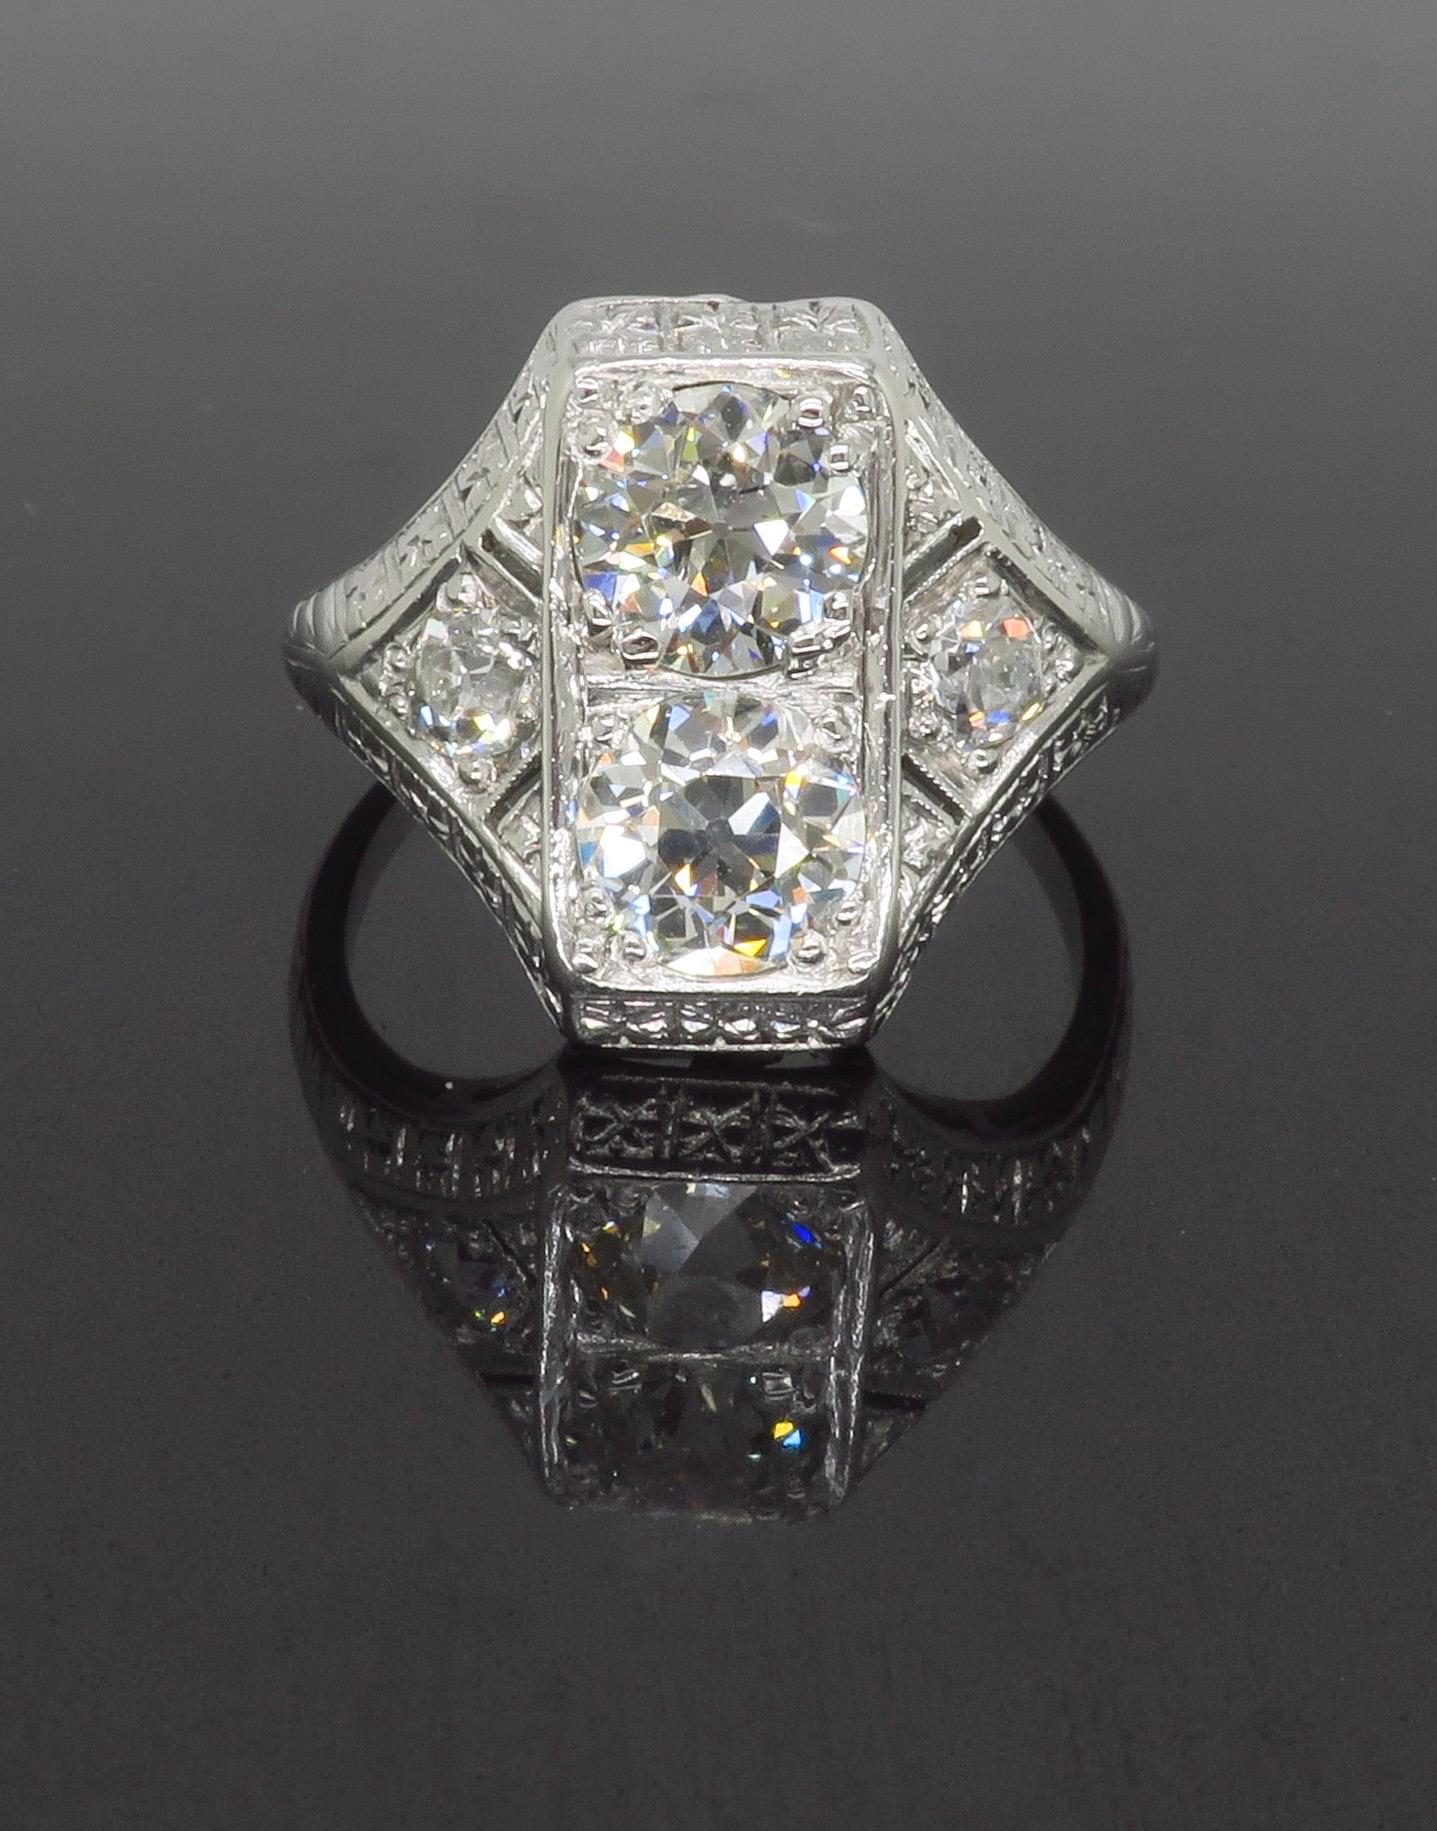 Vintage Moi et Toi ring made in Platinum with 2.02ctw of Diamonds. 

Center Diamond Carat Weights: .85ct & .87
Diamond Color: G-H
Diamond Clarity: VS1-VS2
Diamond Cut: Old European Cut  
Side Diamond Carat Weight: .15ctw
Diamond Color: G-H
Diamond